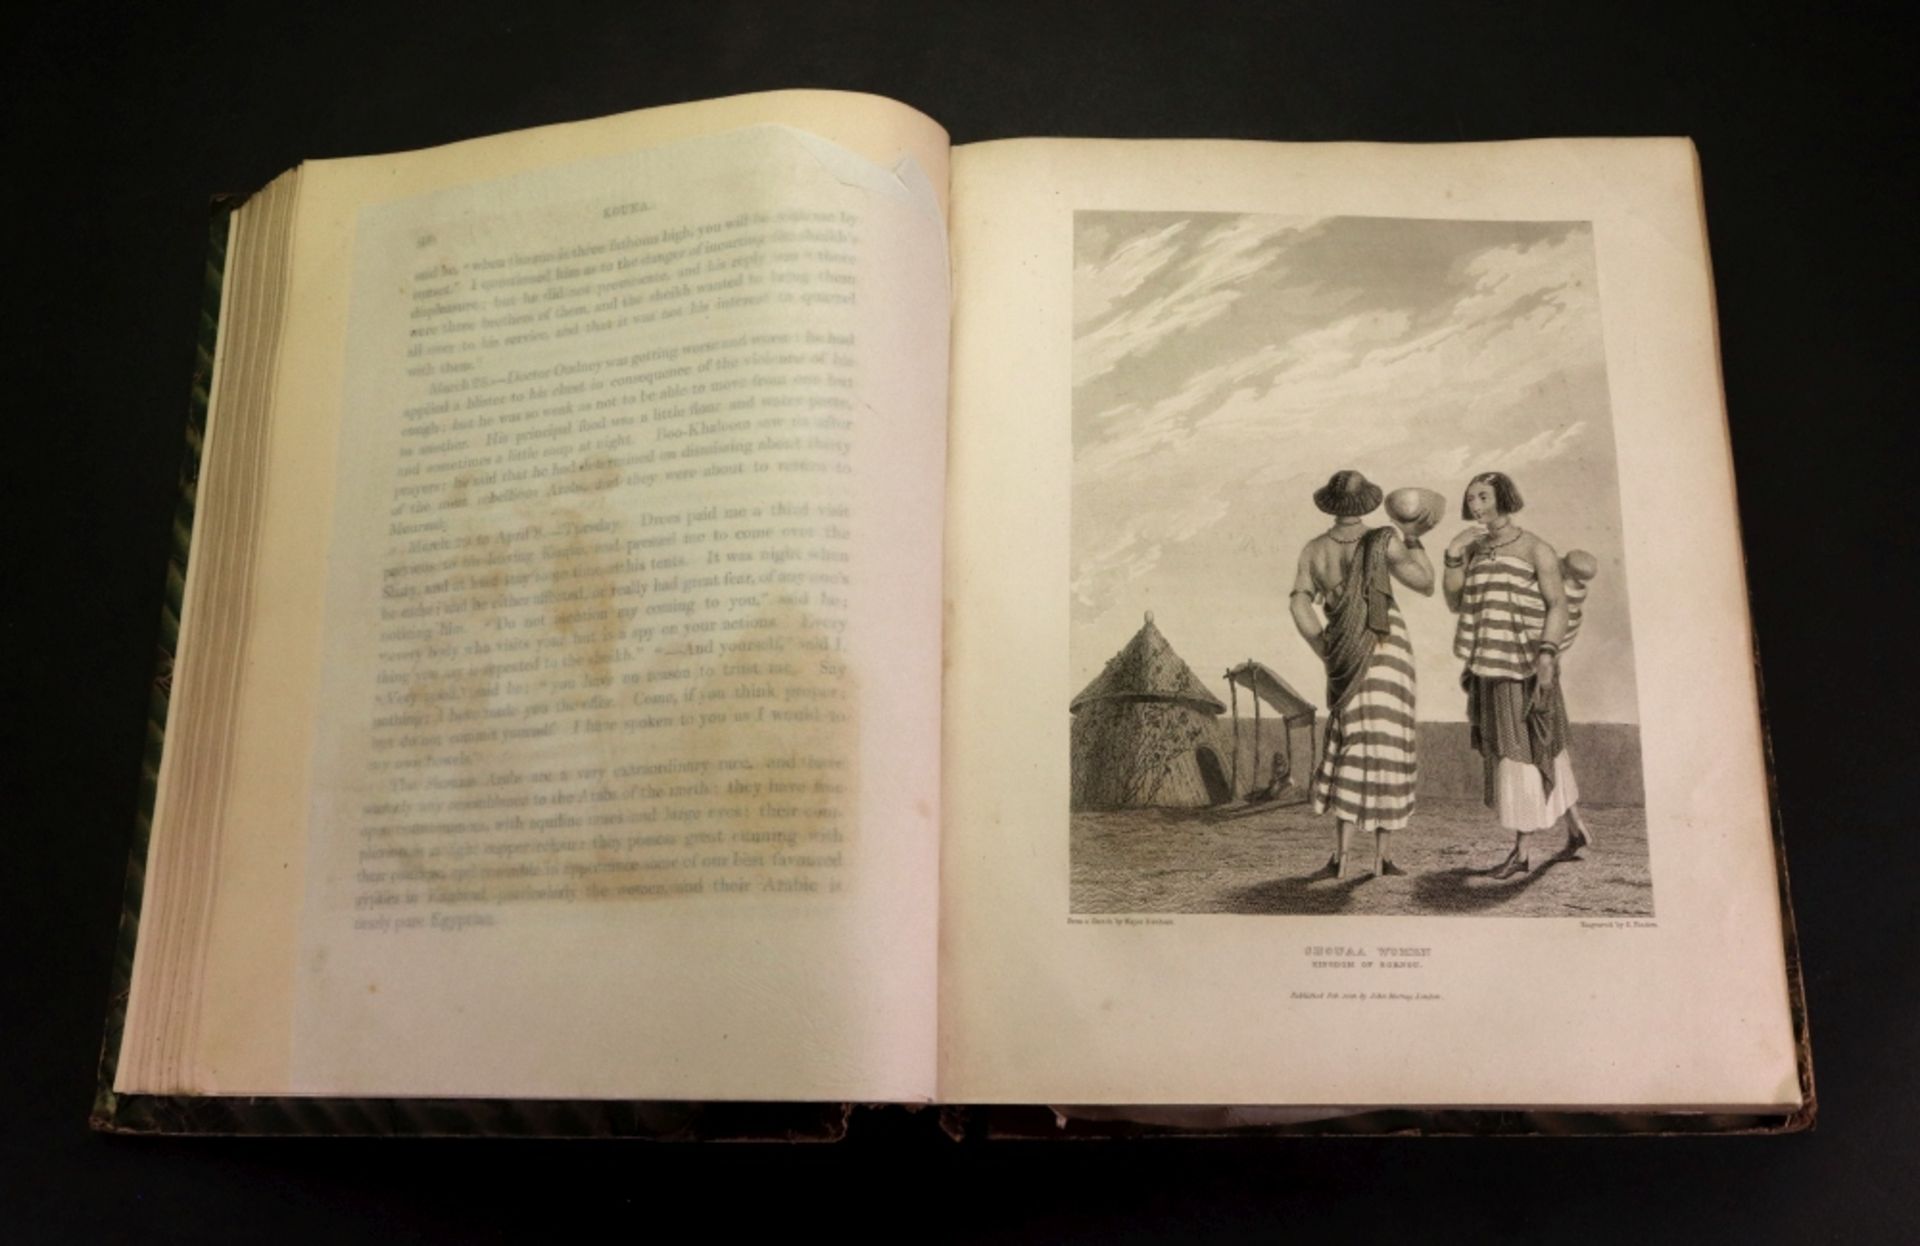 DENHAM (Major Dixon) Narrative of Travels and Discoveries in Northern and Central Africa in the